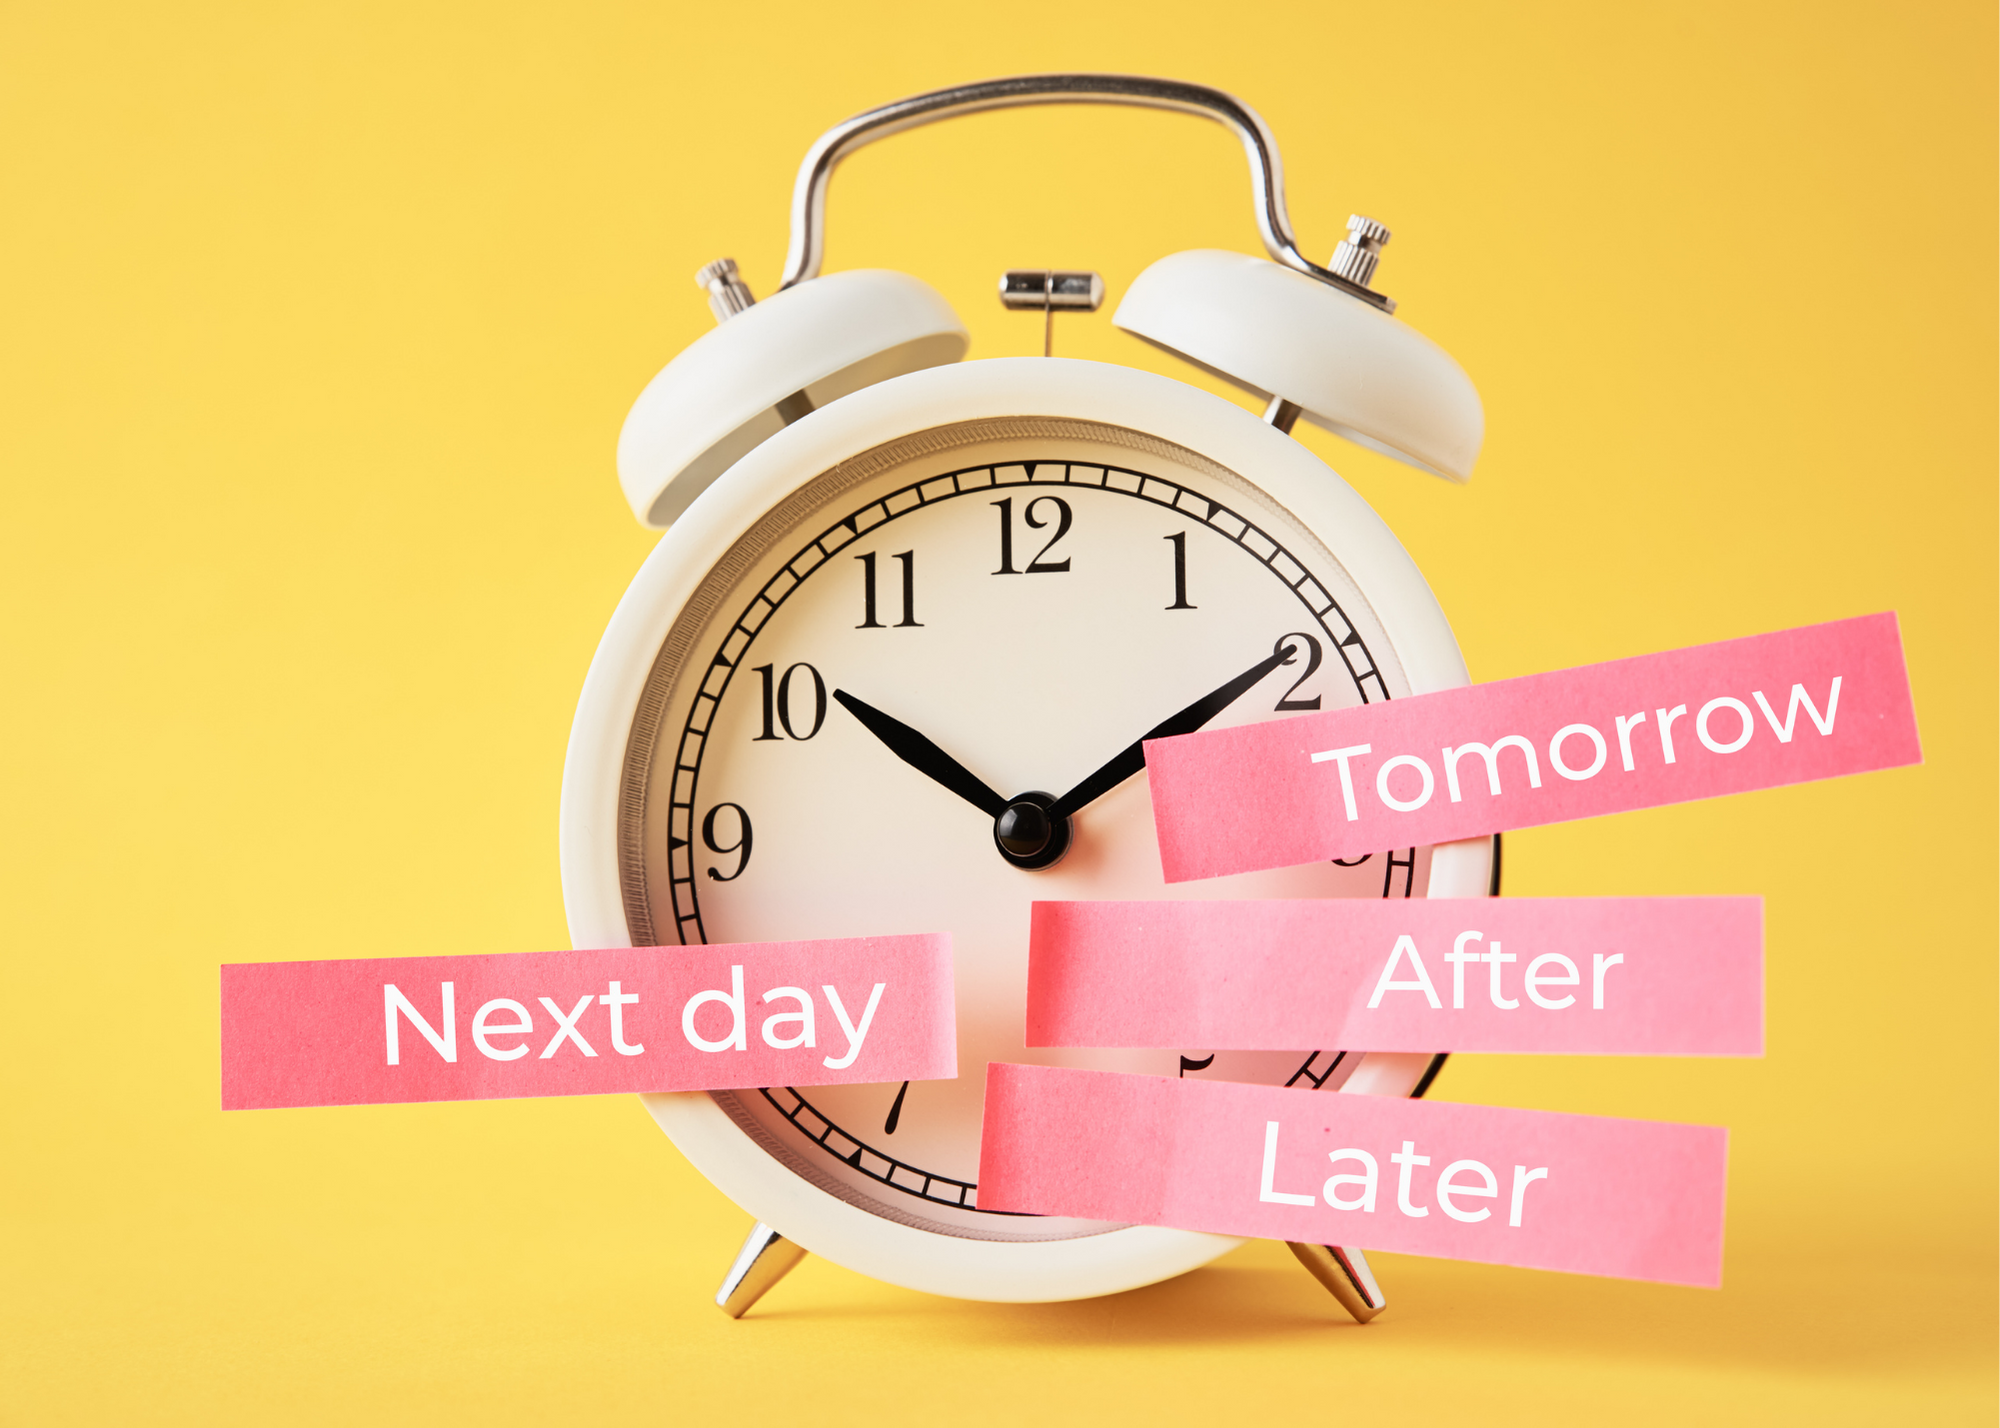 alarm clock with sticky notes attached that say "Next day", "Tomorrow", "After", and "Later"